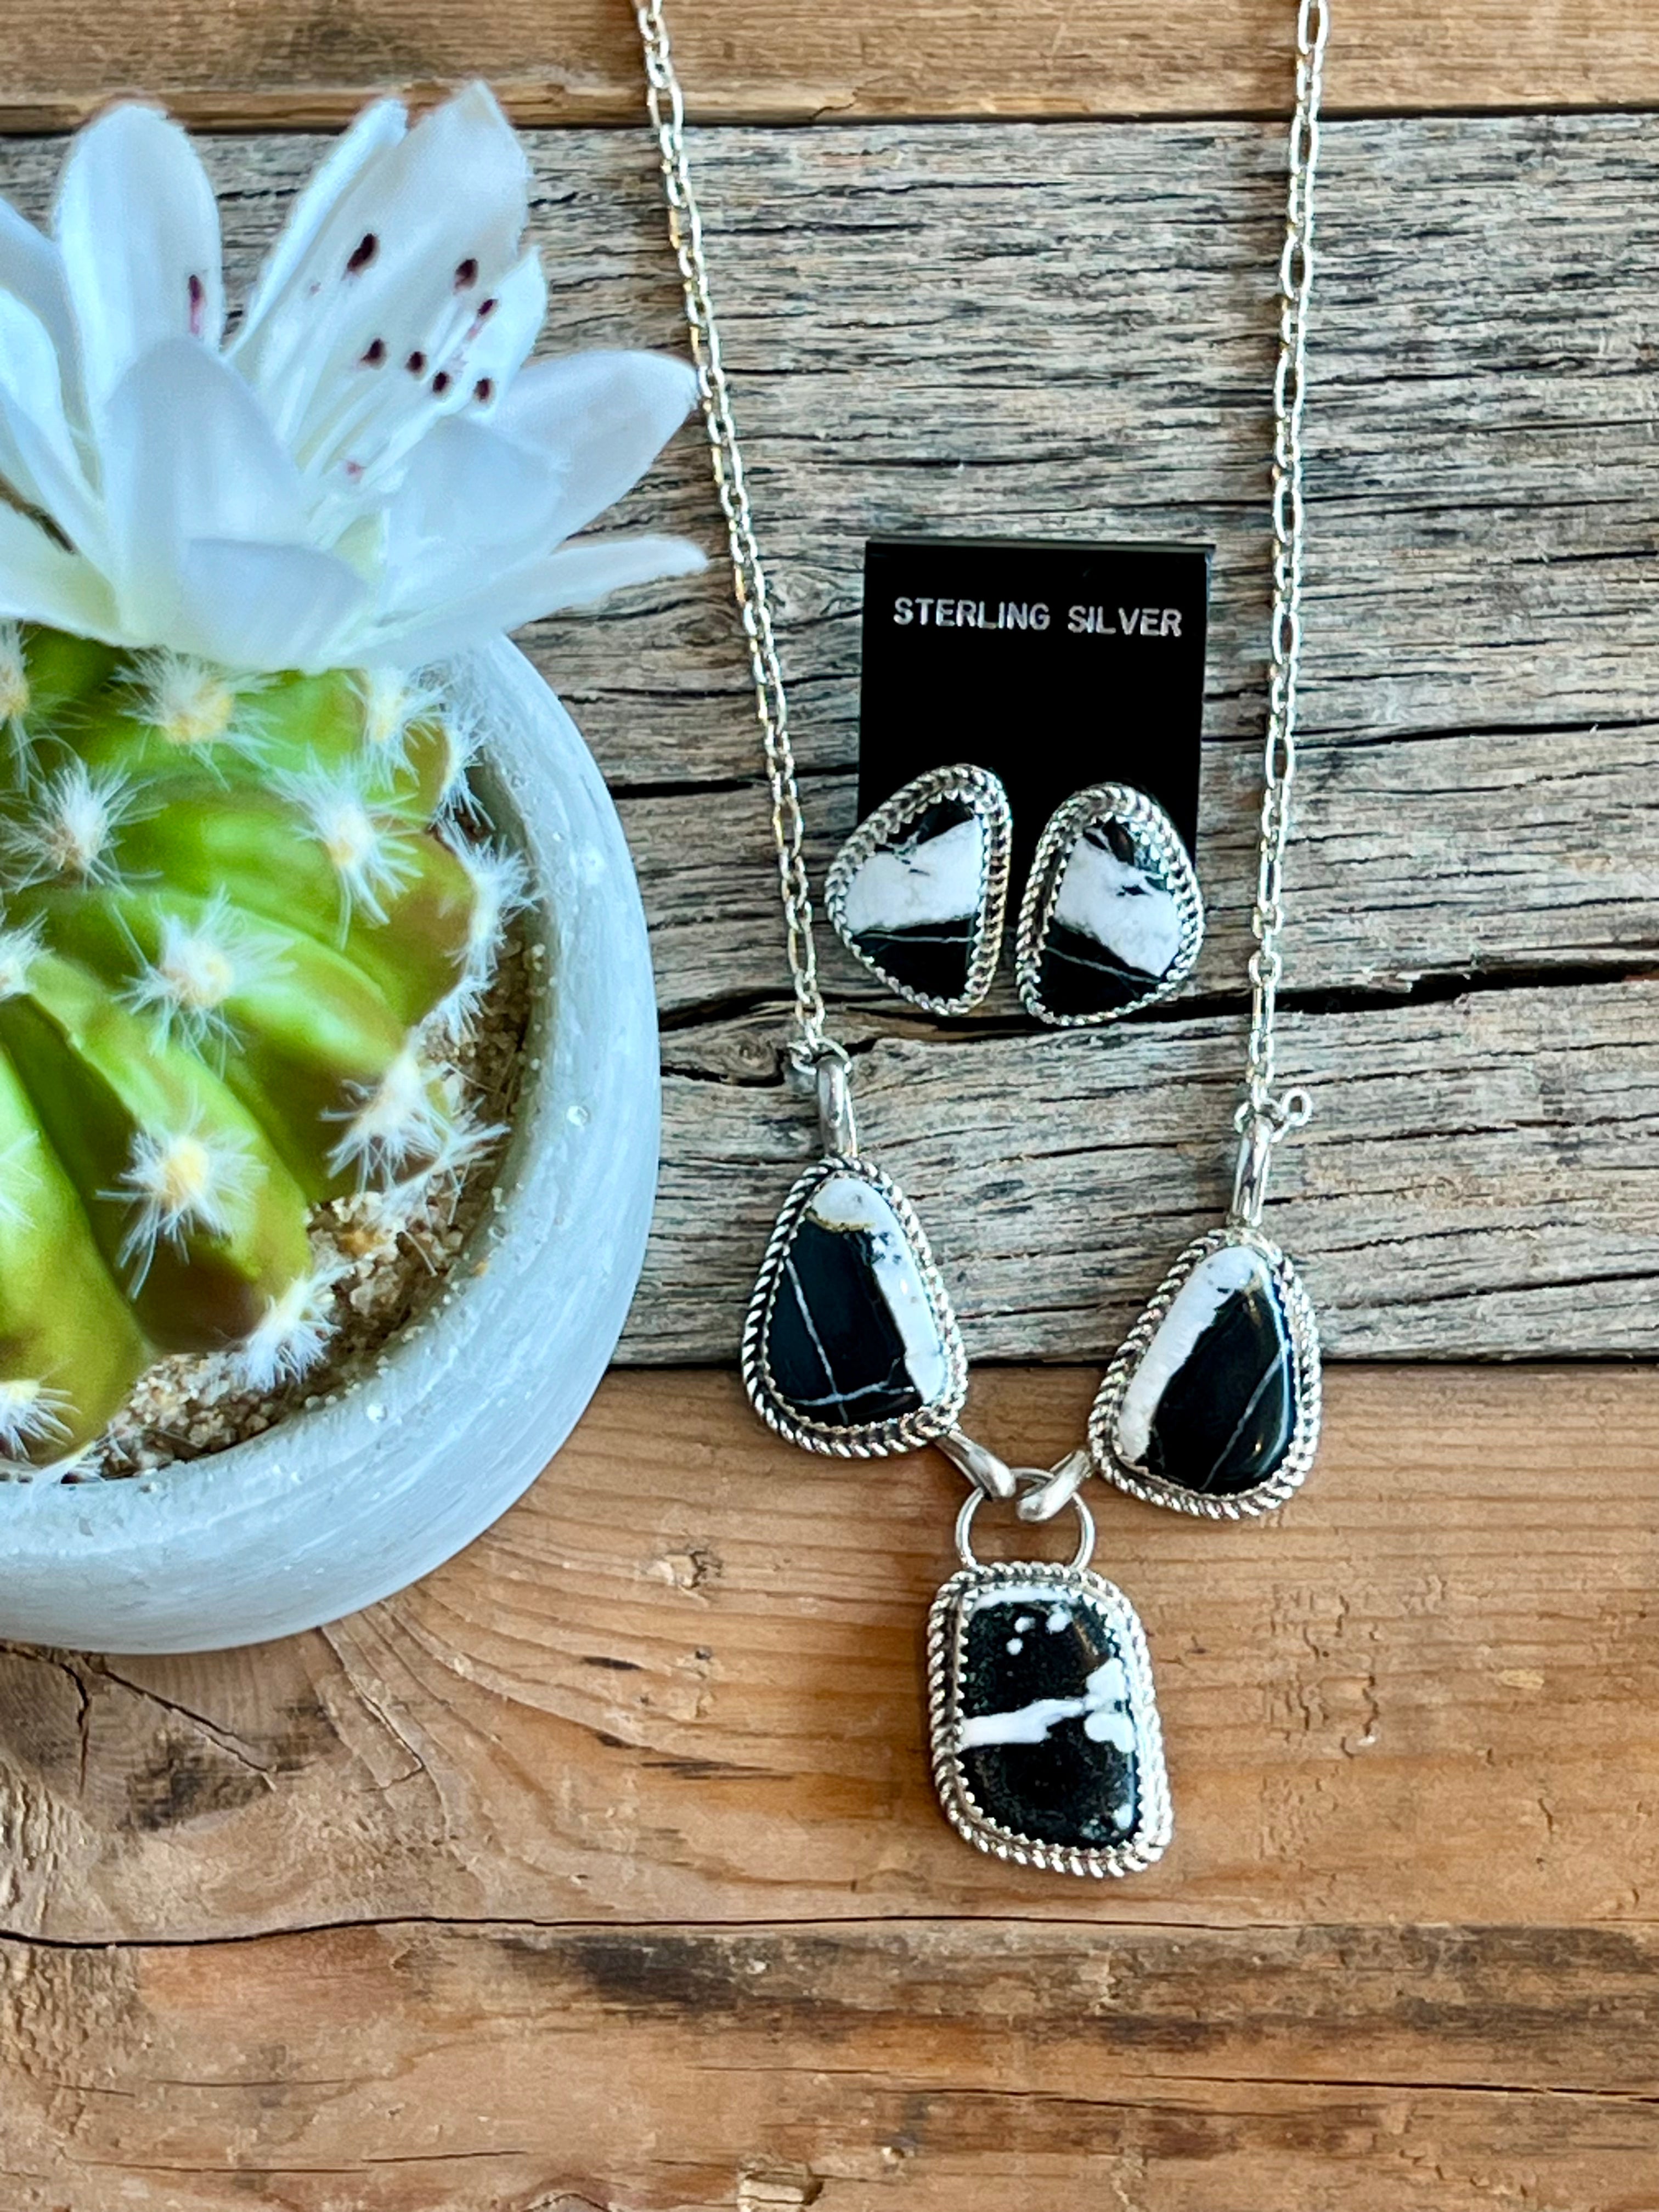 White Buffalo Sterling Silver Necklace and Earrings Set